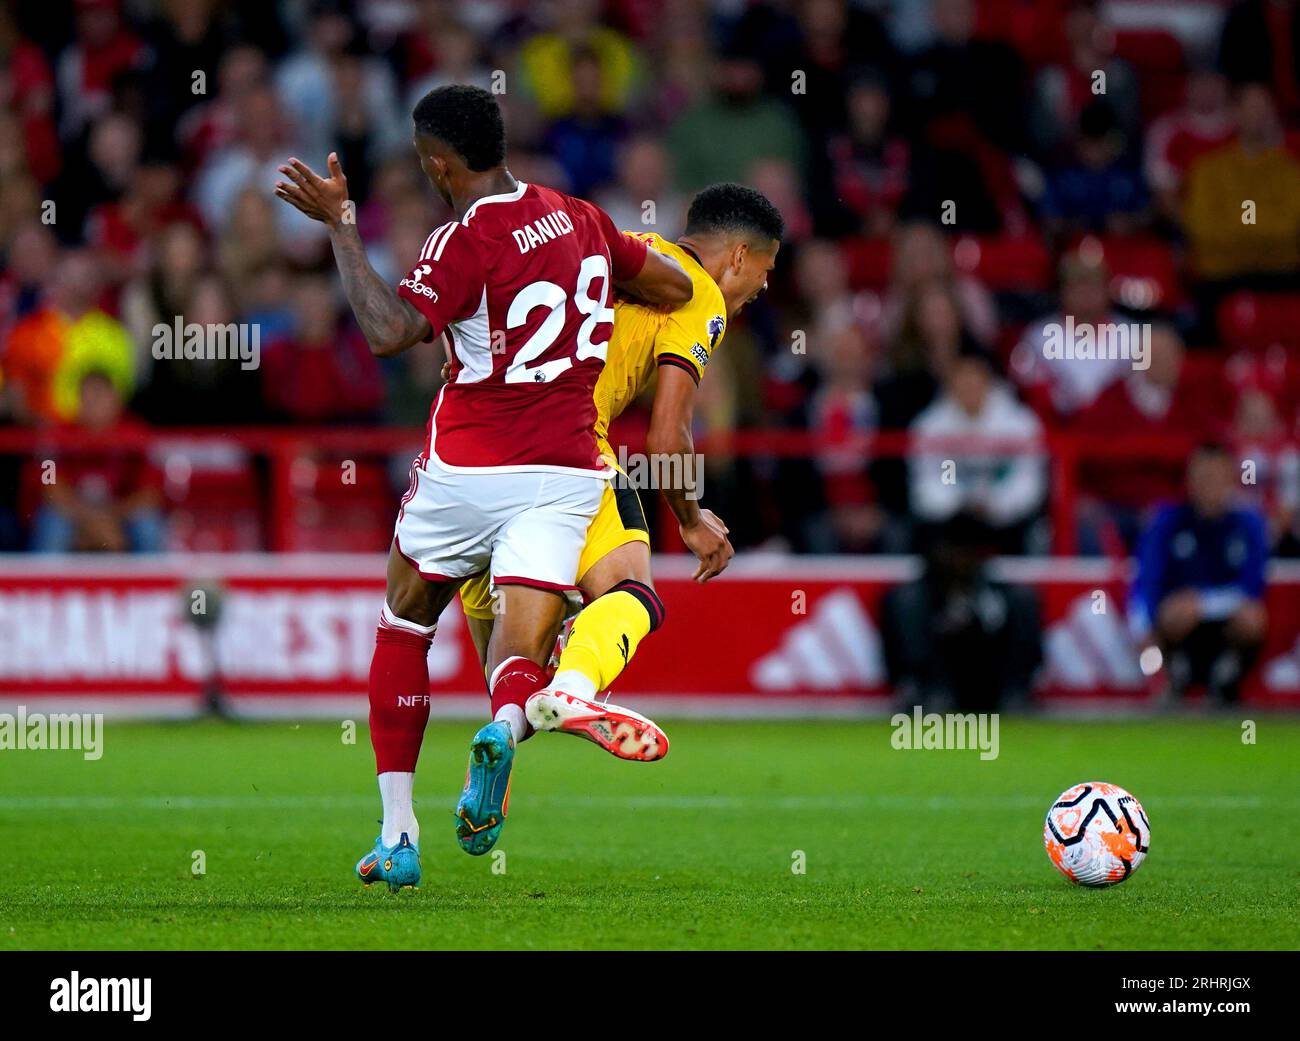 Nottingham Forest's Danilo (left) collides with Sheffield United's William Osula as they battle for the ball during the Premier League match at the City Ground, Nottingham. Picture date: Friday August 18, 2023. Stock Photo